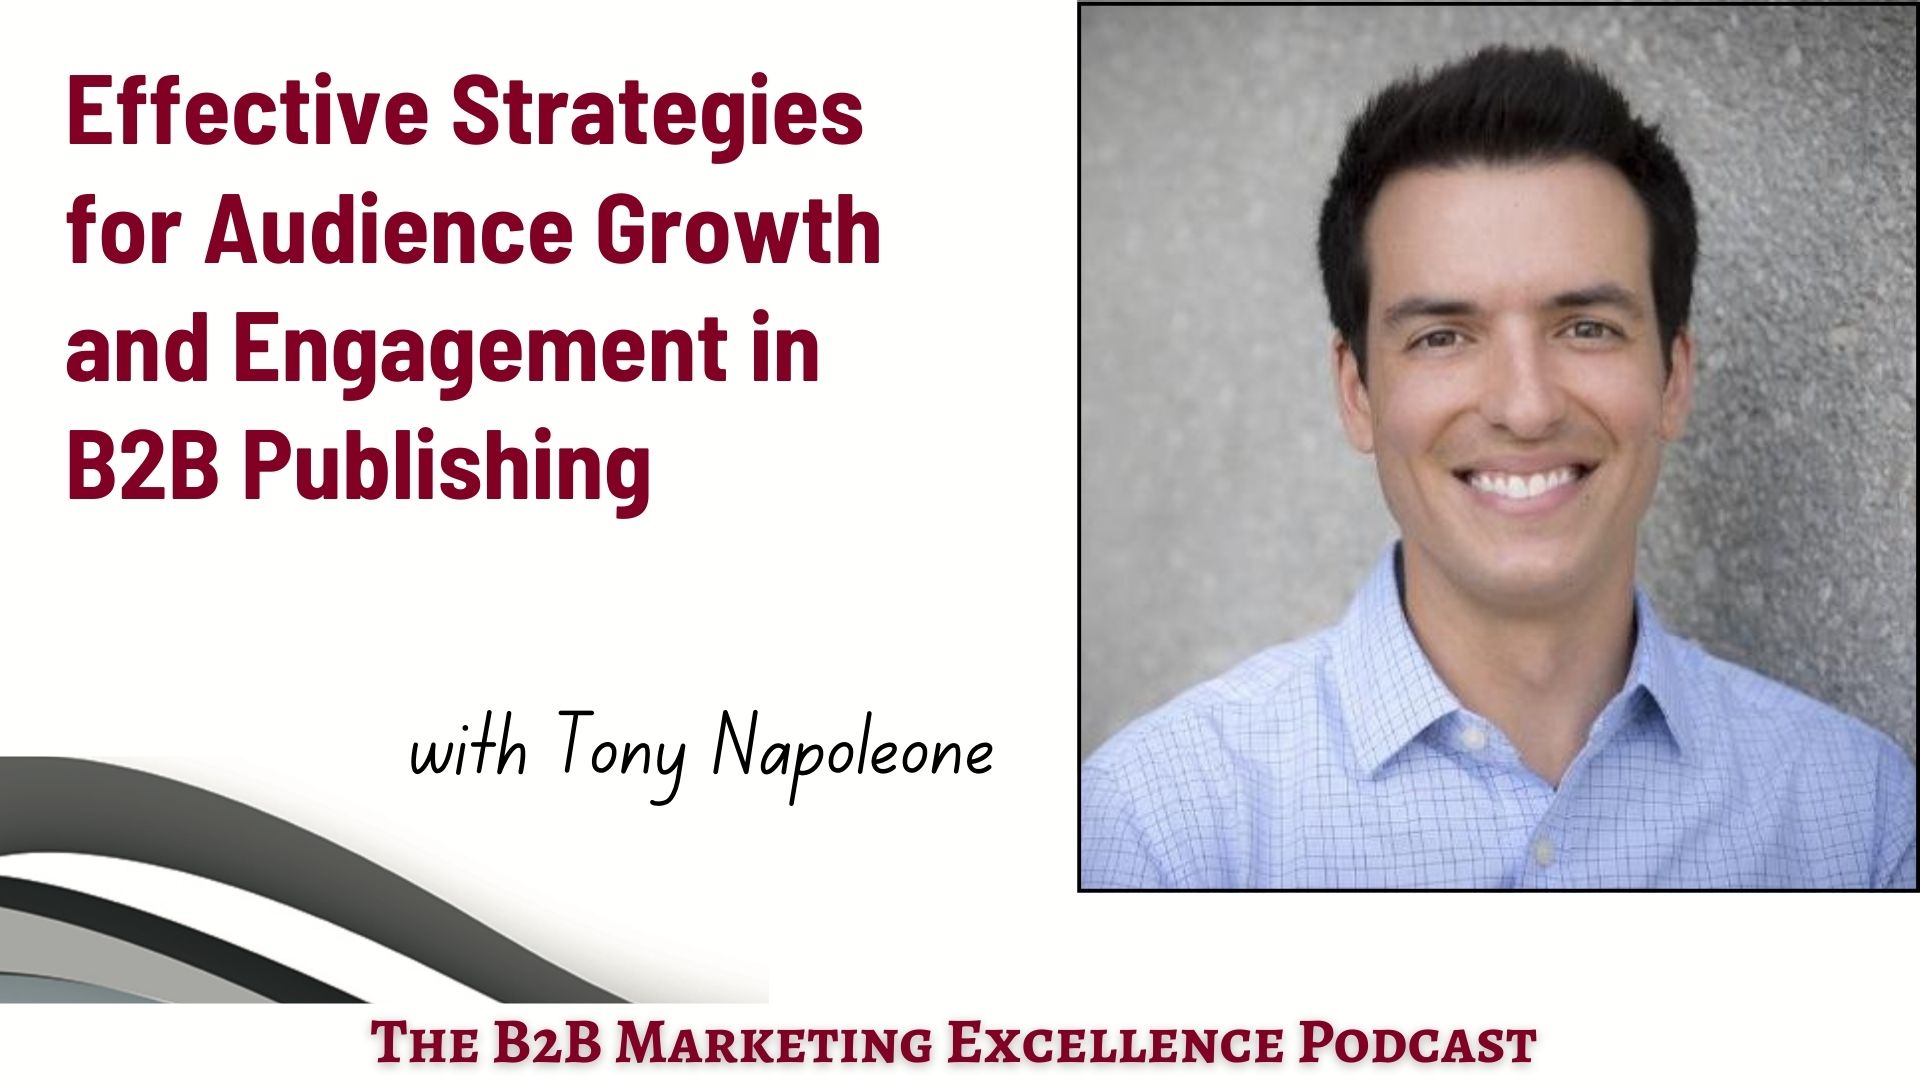 Podcast – Effective Strategies for Audience Growth and Engagement in B2B Publishing